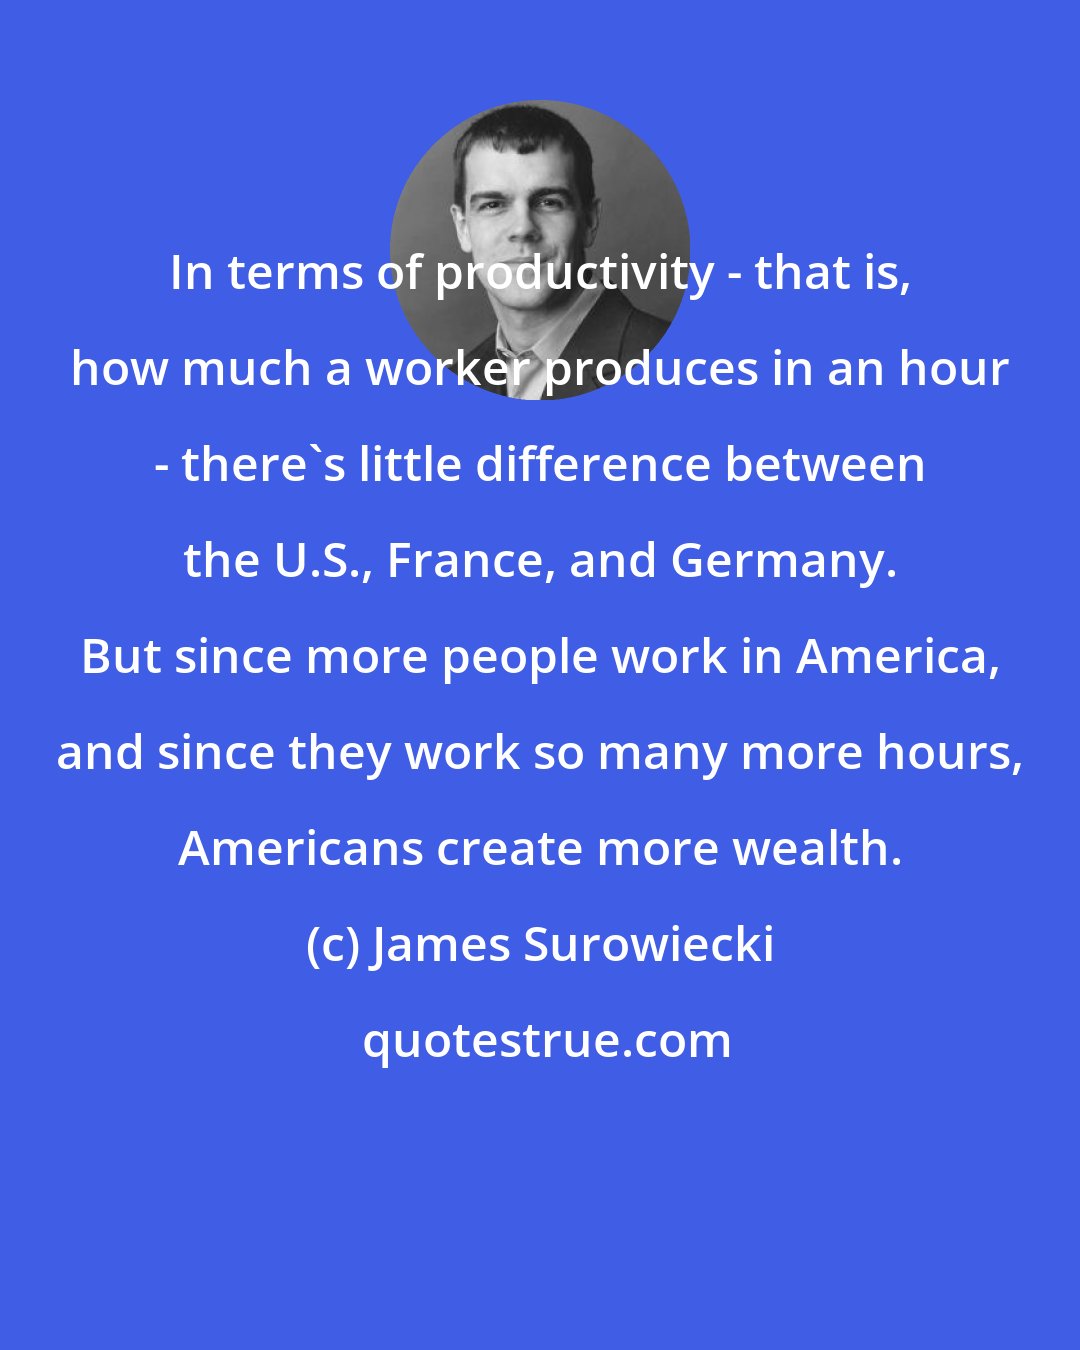 James Surowiecki: In terms of productivity - that is, how much a worker produces in an hour - there's little difference between the U.S., France, and Germany. But since more people work in America, and since they work so many more hours, Americans create more wealth.